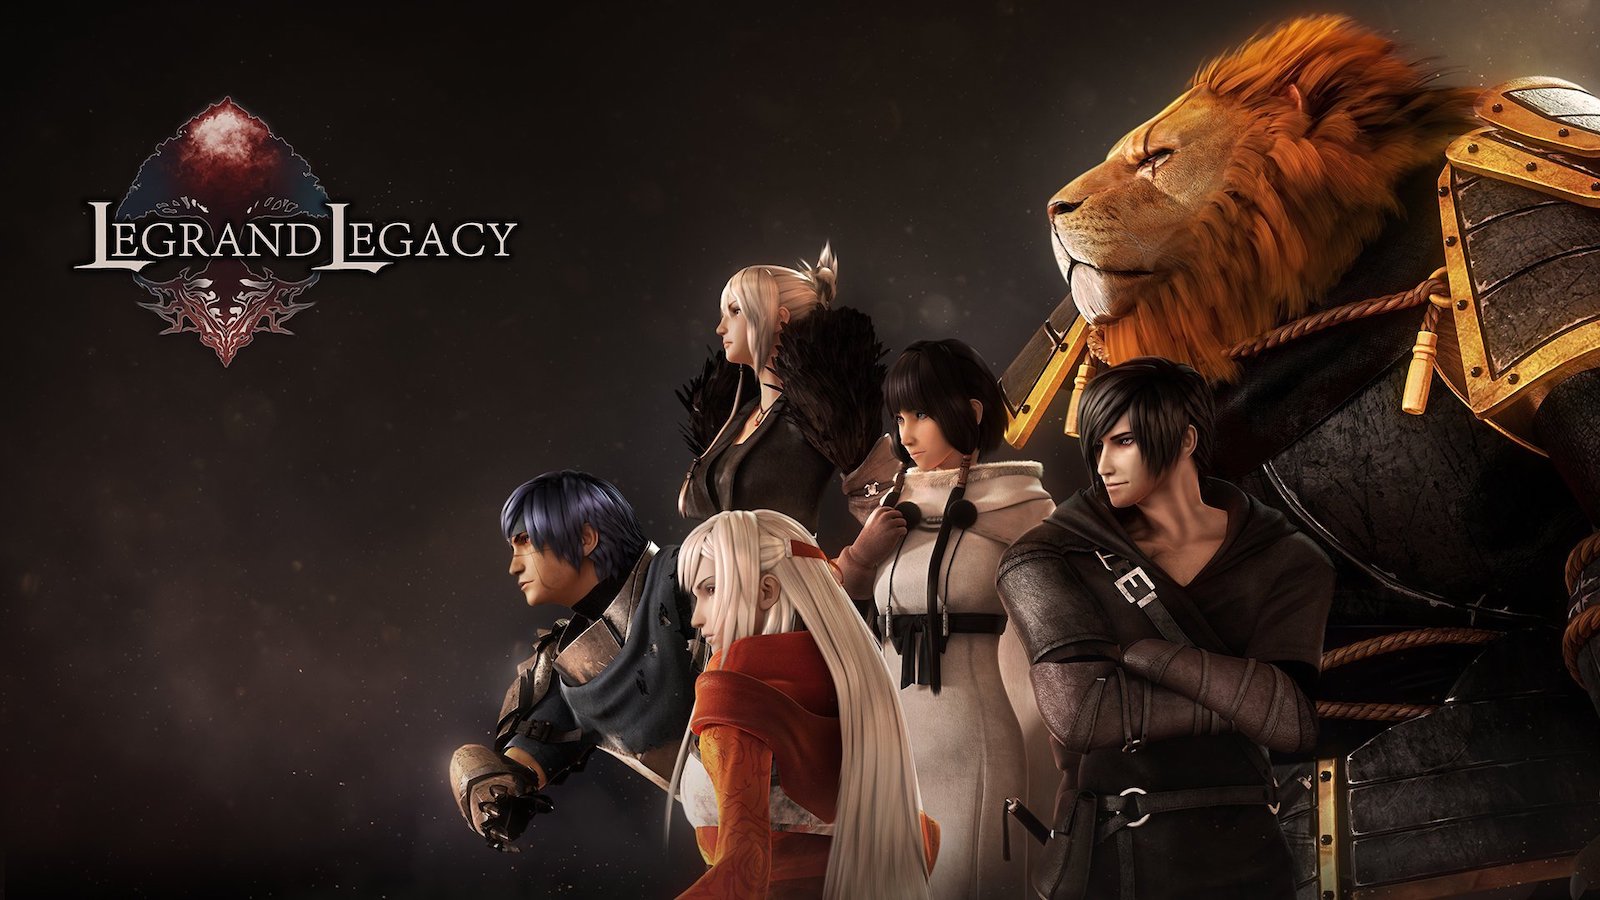 legrand legacy tale of the fatebounds